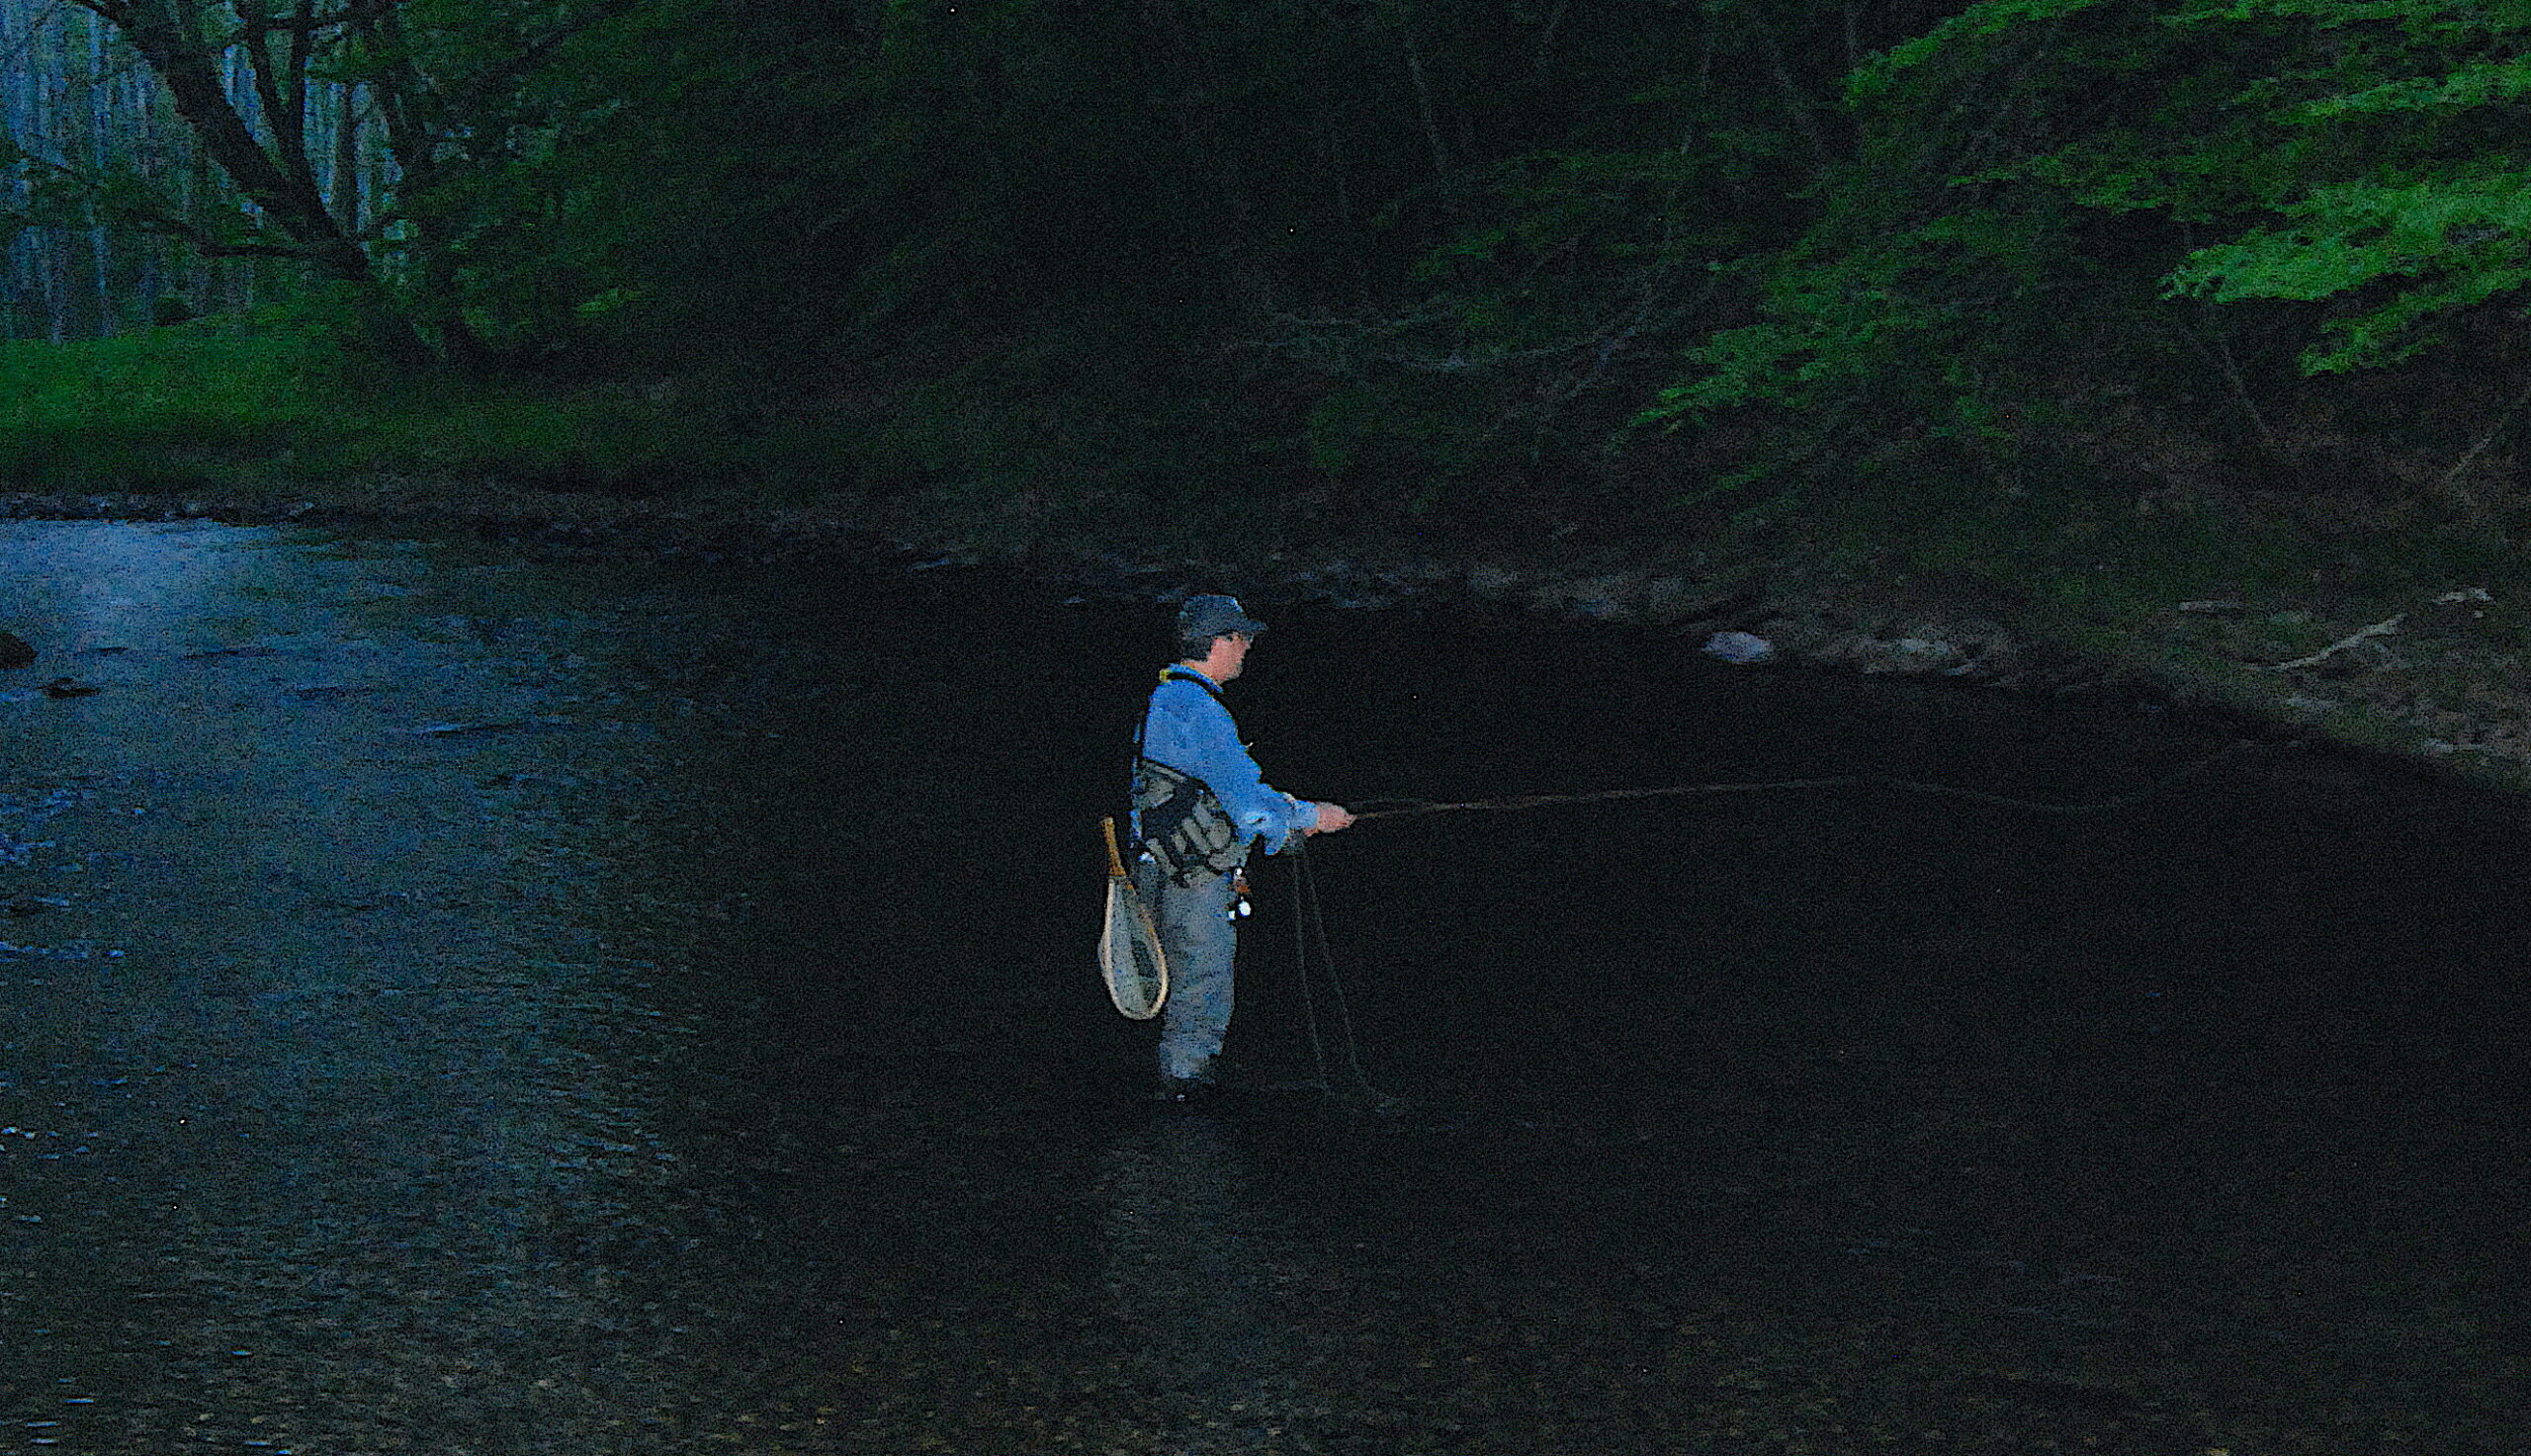 Clinton County's 'fishing creek' is picturesque